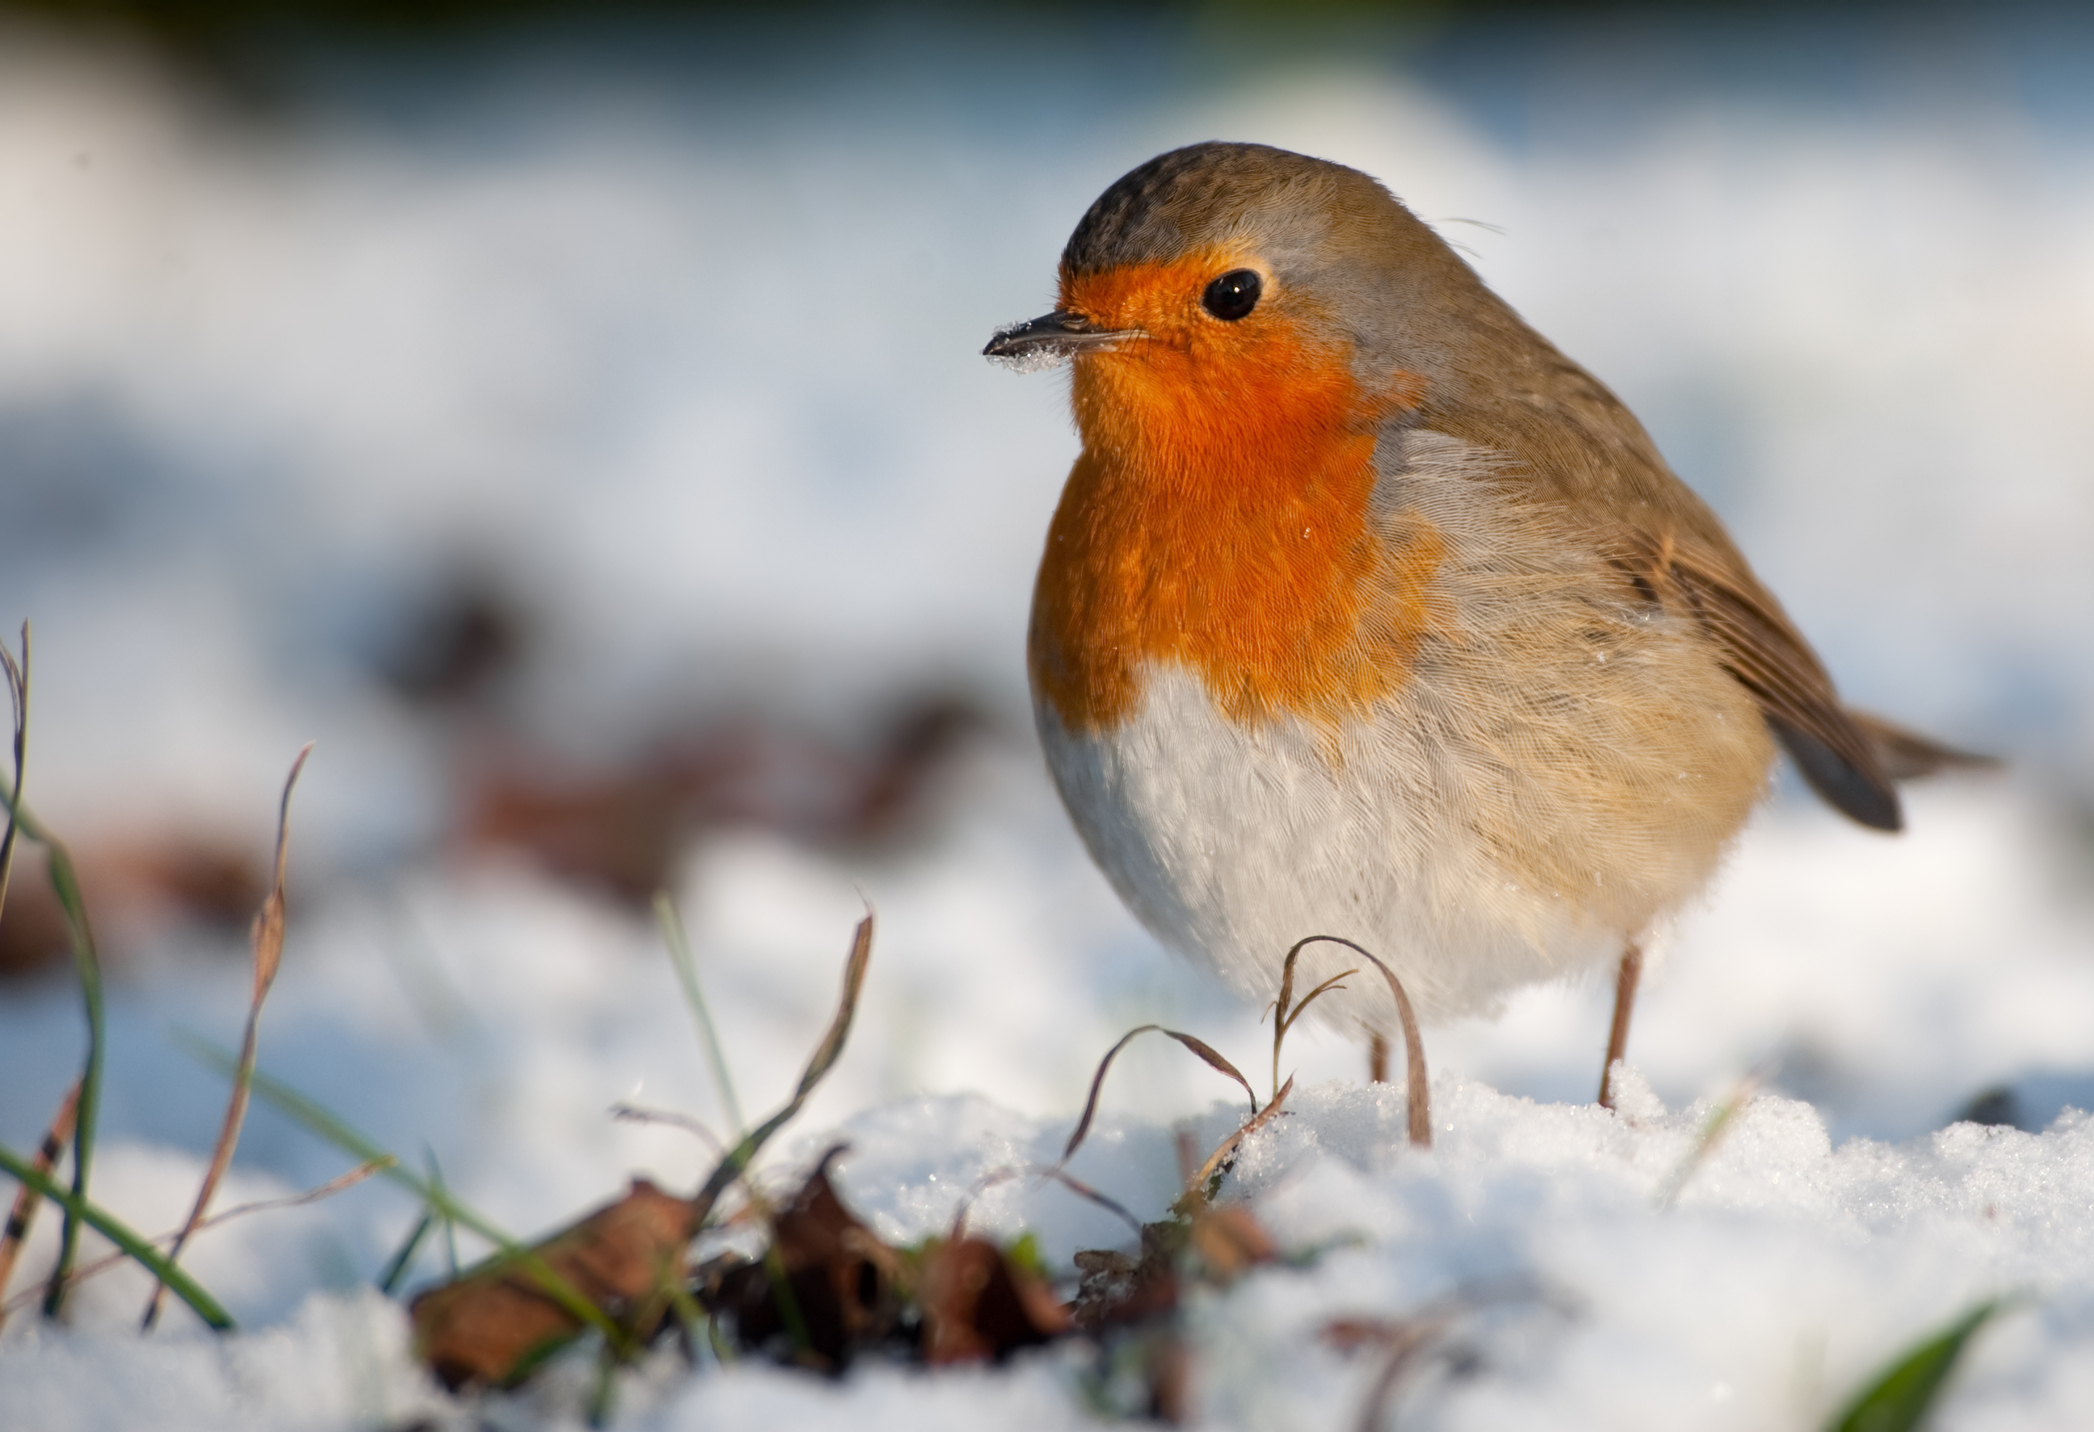 A beautiful robin stands in the snow in a winter garden